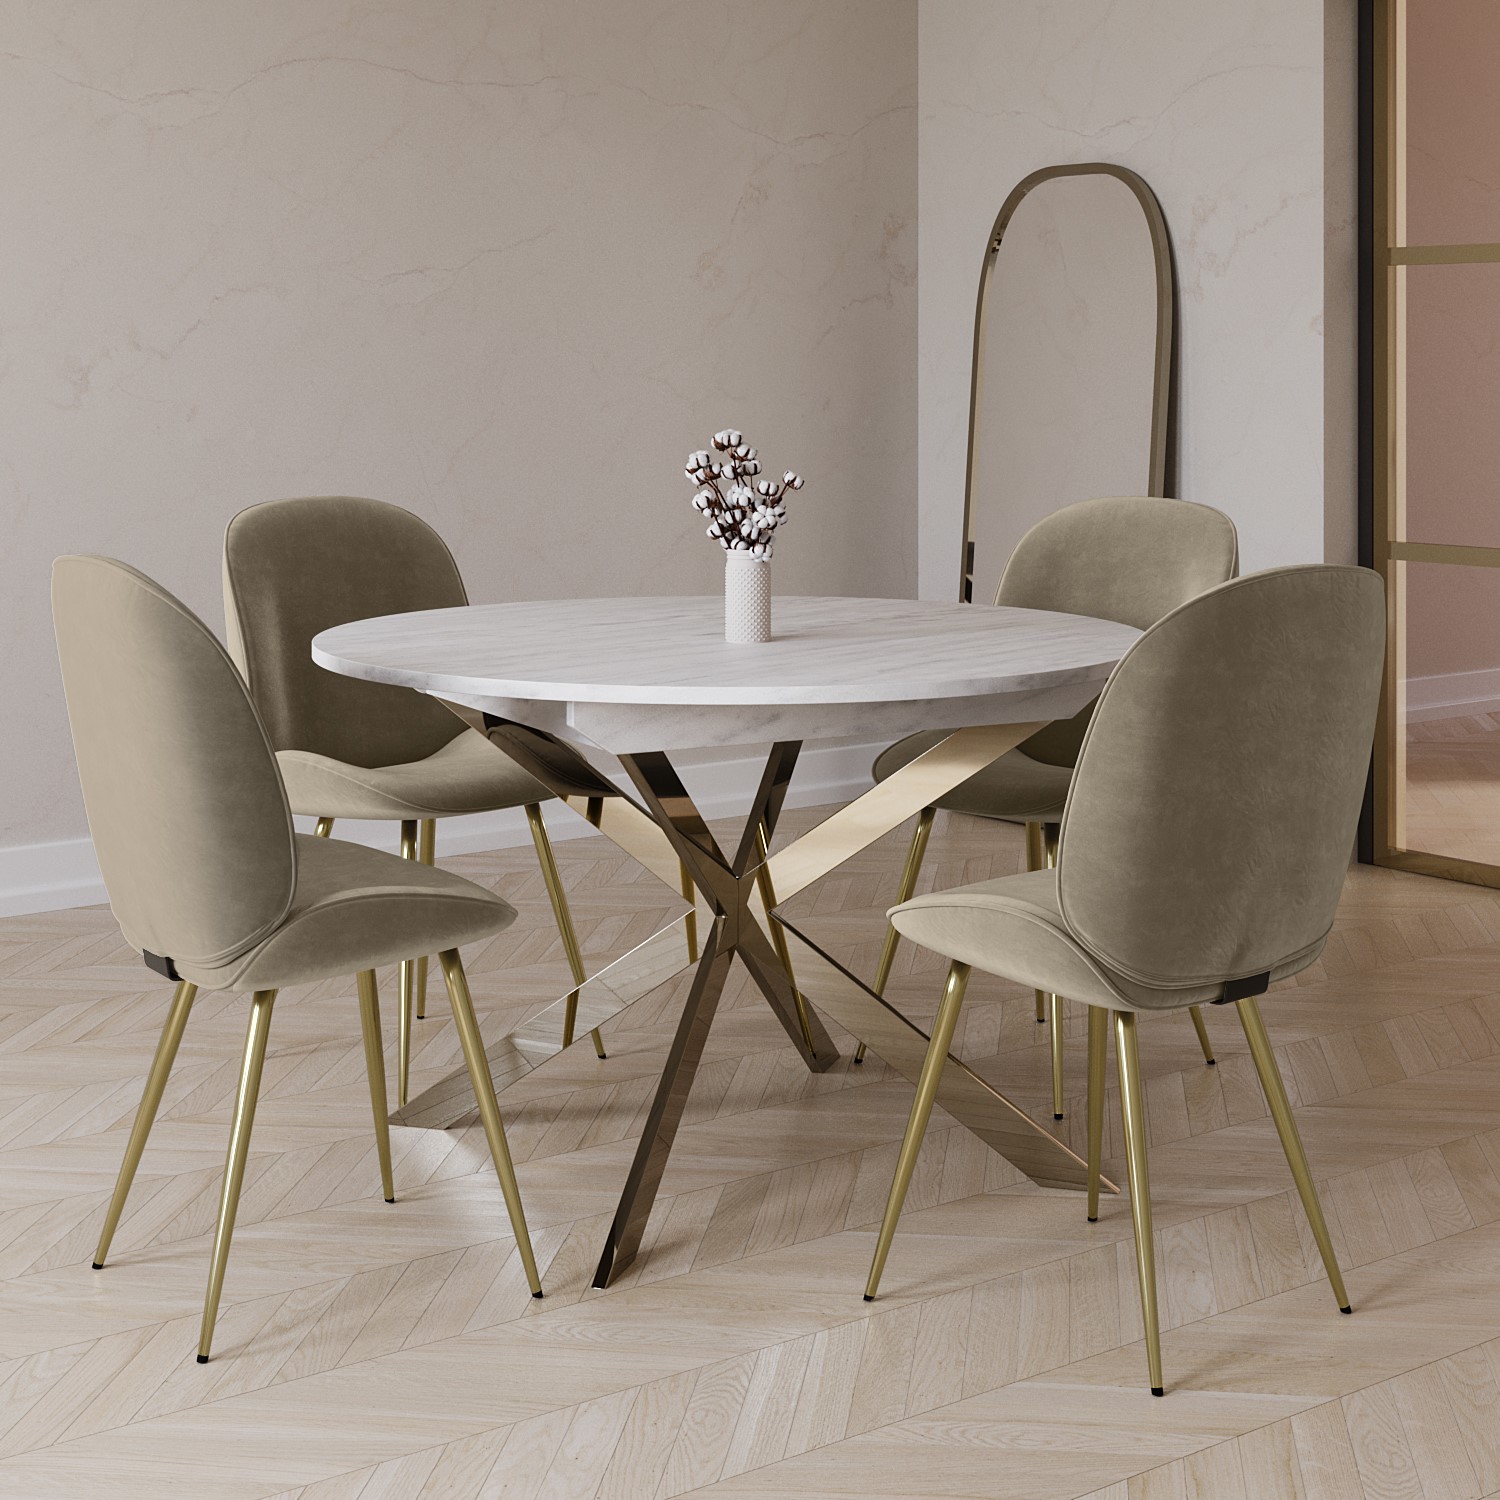 Photo of White marble effect round to oval extendable dining table with 4 mink velvet dining chairs - reine